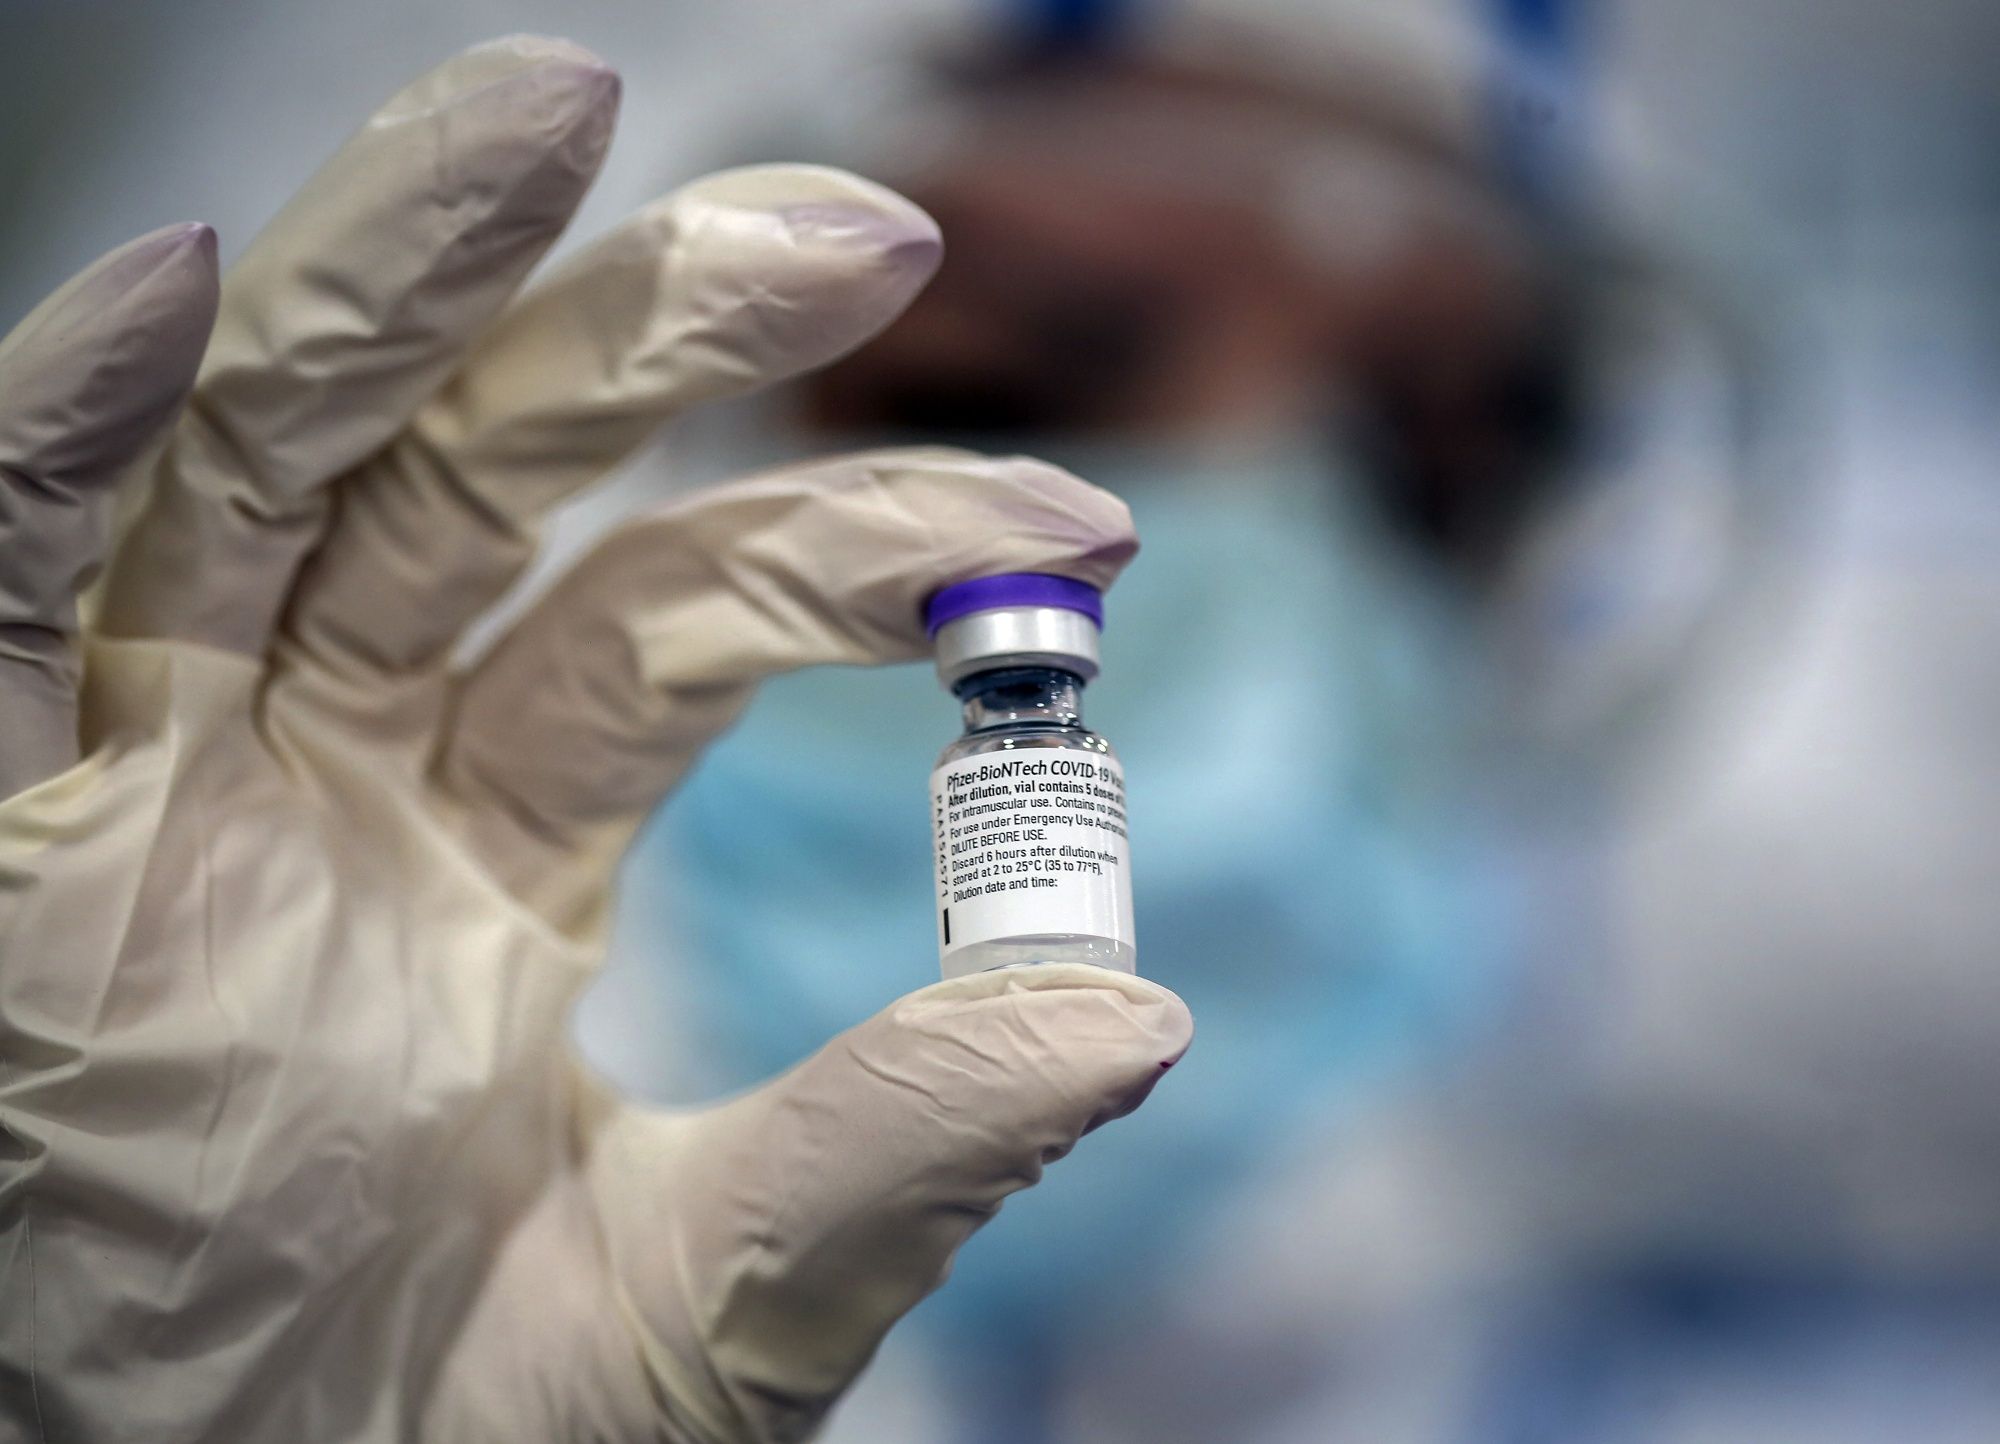 A healthcare worker holds a vial of the Pfizer-BioNTech Covid-19 vaccine at the Mother and Child Hospital in Belgrade, Serbia, on Sunday, Jan. 10, 2021. Russian Direct Investment Fund (RDIF) signed an agreement with Serbian government to supply 2 million doses of Sputnik V Covid-19 vaccine, RDIF says in statement. Photographer: Oliver Bunic/Bloomberg